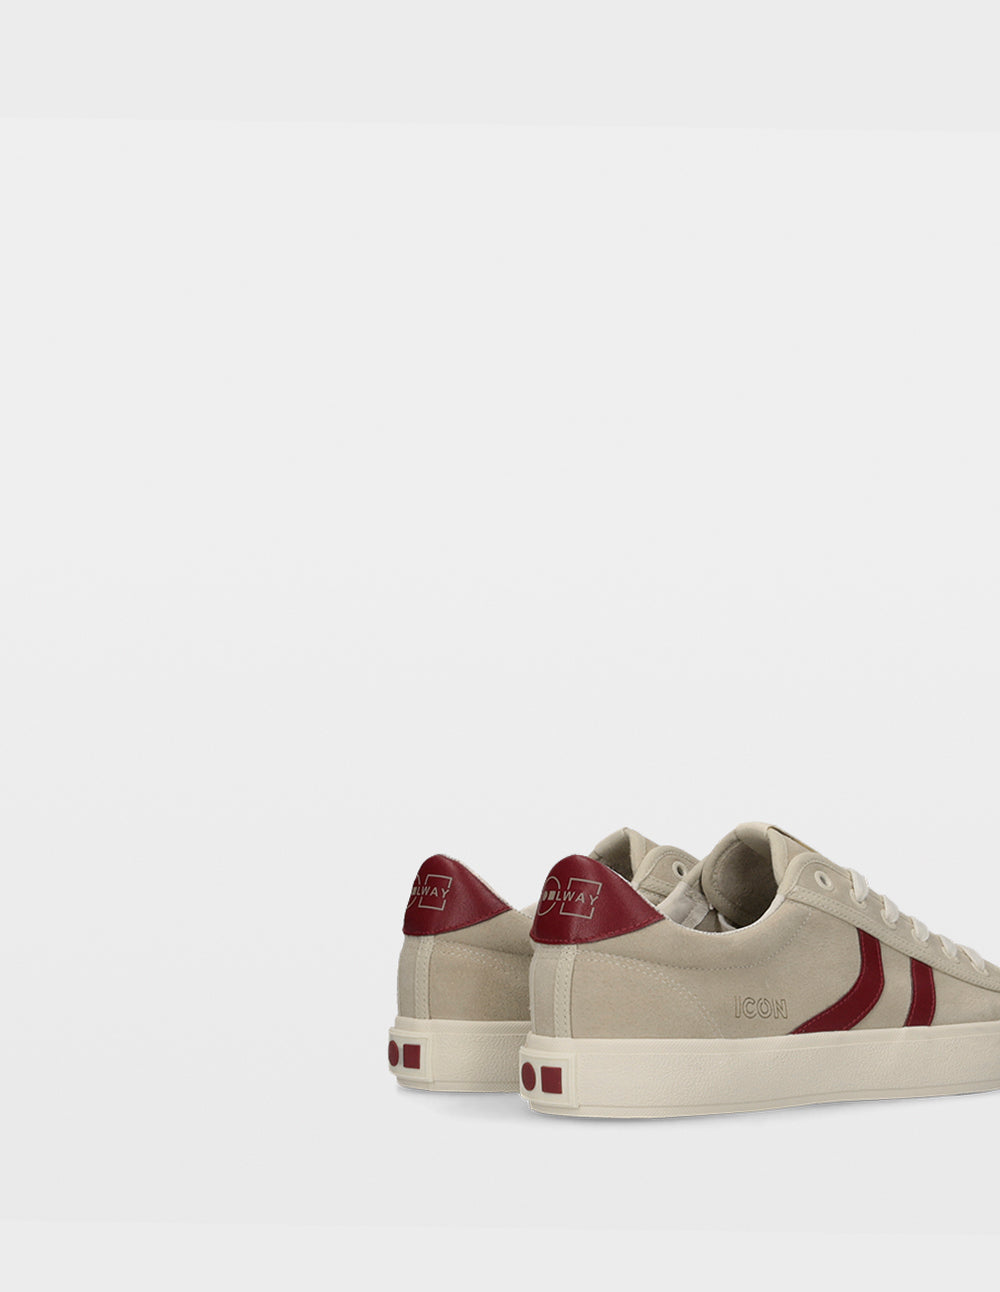 ICON-ONE BEIGE/BURGUNDY LEATHER HOMBRE